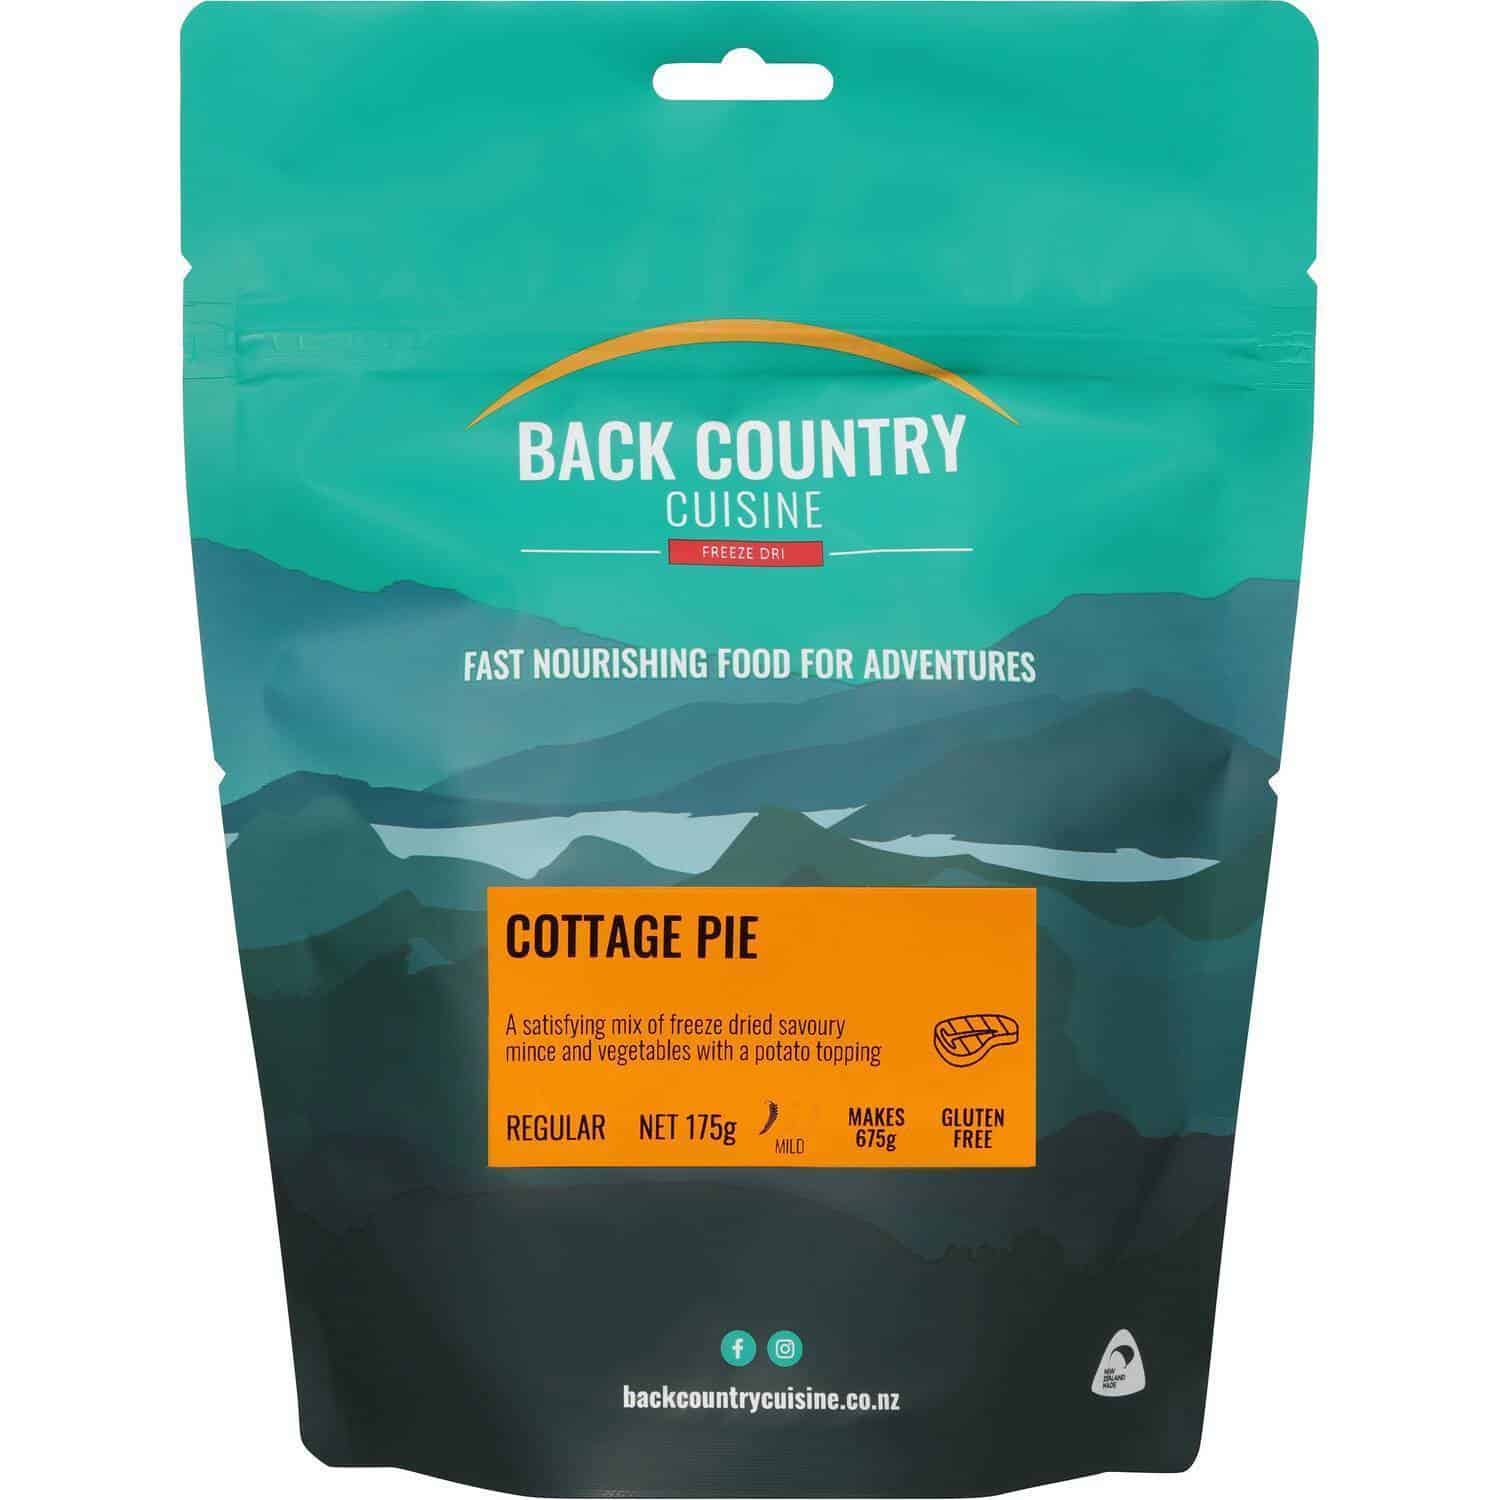 Back Country Cuisine Cottage Pie Regular - Tramping Food and Accessories sold by Venture Outdoors NZ